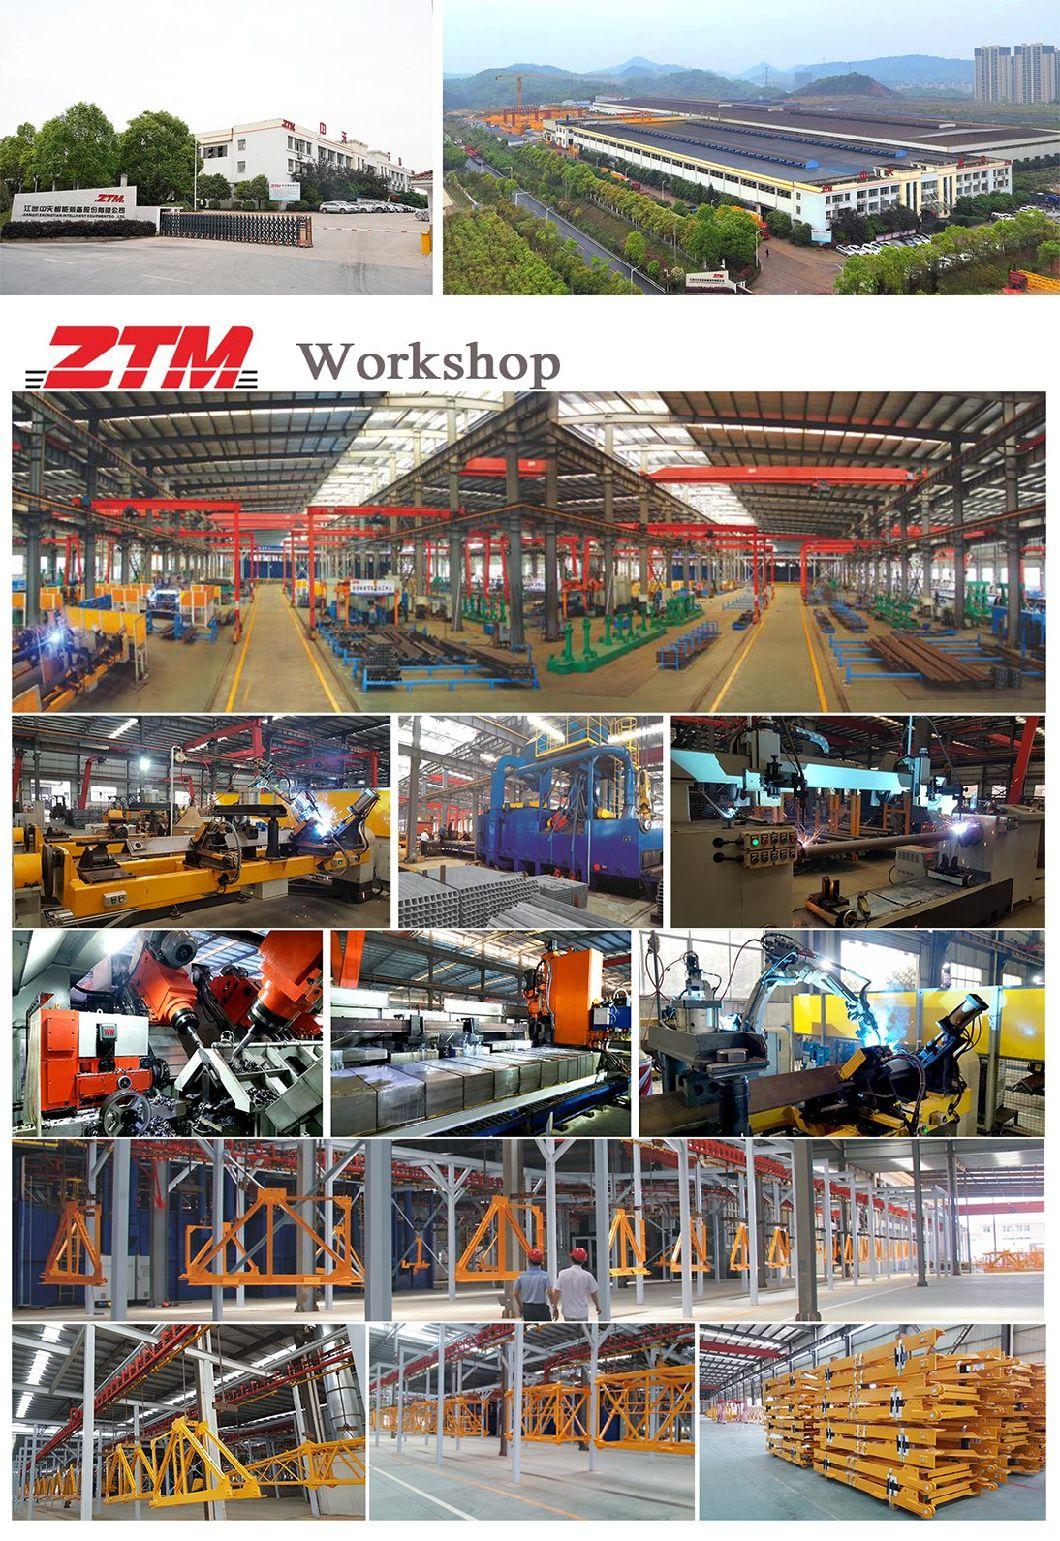 Ztm L376-20t High Quality Construction Passenger Good Hoist Equipment Mobile Luffing Jib Hydraulic Tower Crane HS Code and Rates Hire Zimbabwe